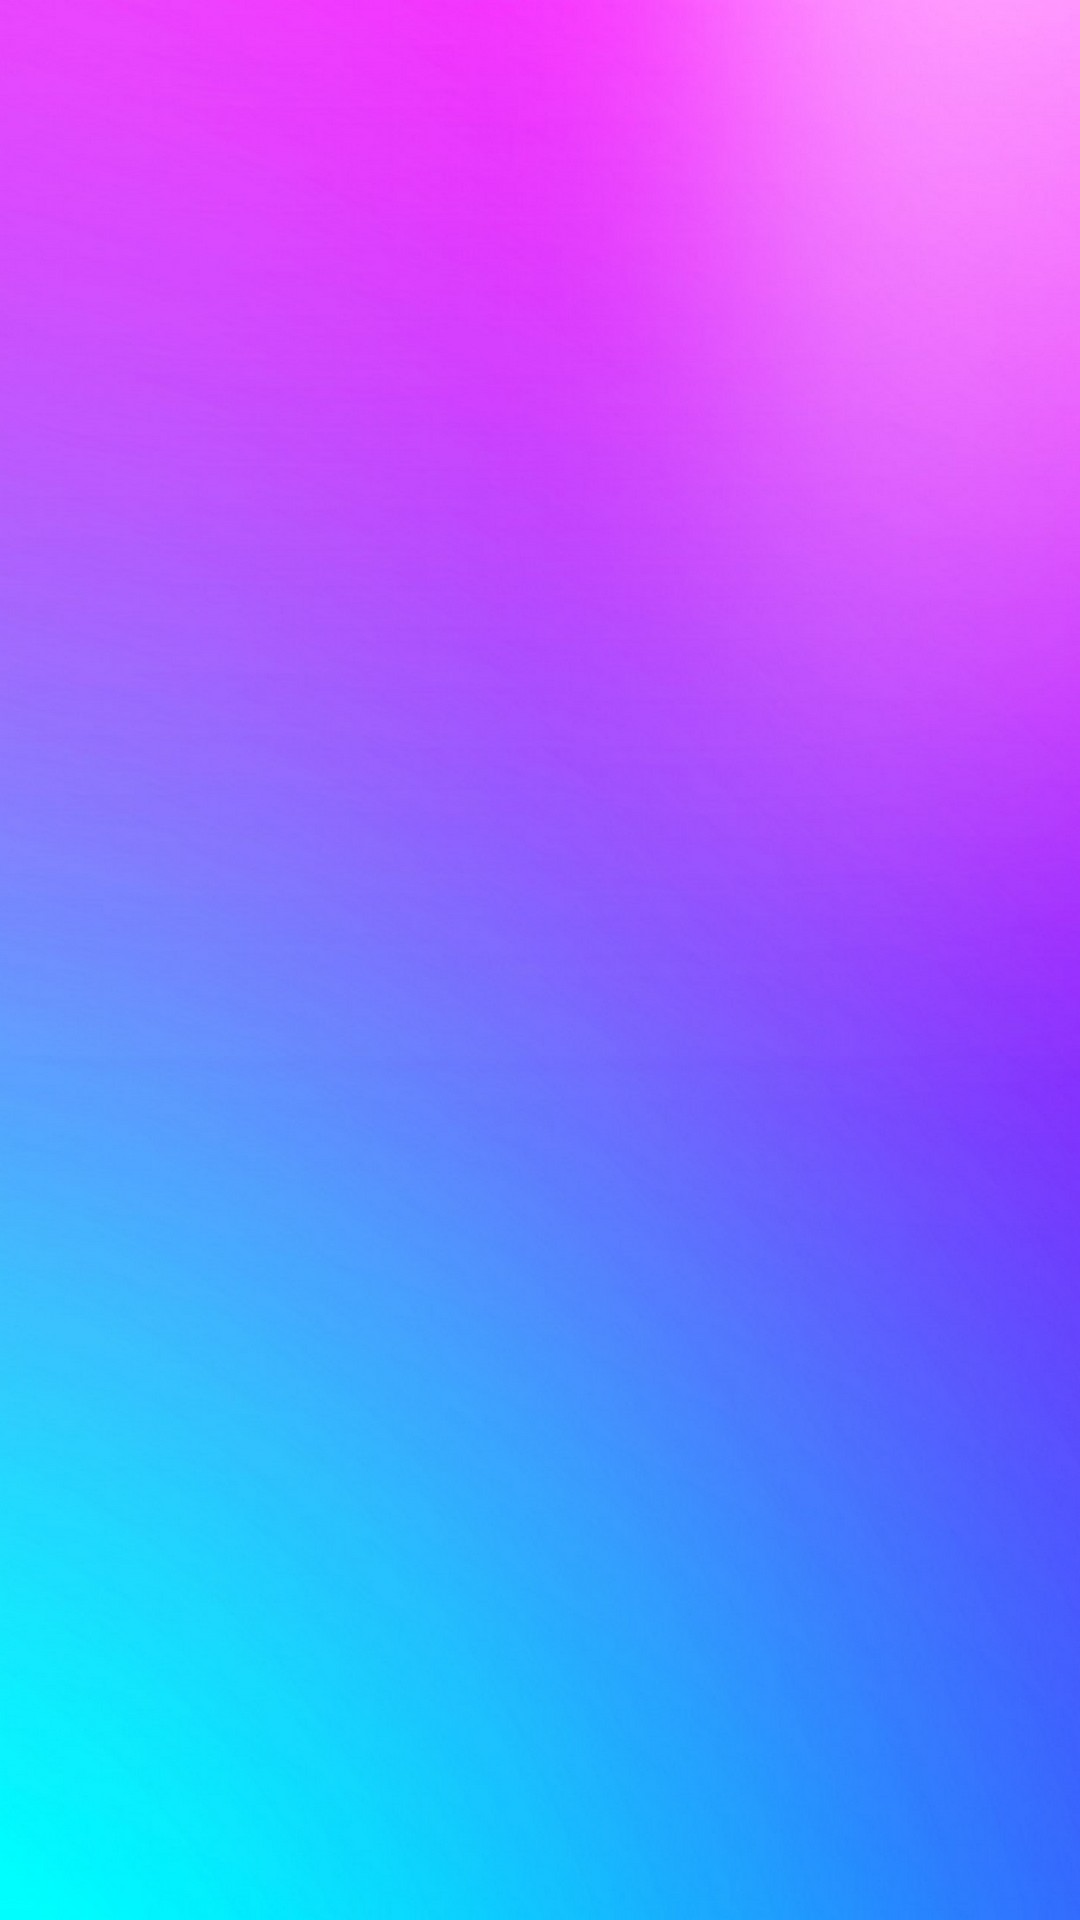 Gradient HD Wallpapers For Android With high-resolution 1080X1920 pixel. You can use this wallpaper for your Android backgrounds, Tablet, Samsung Screensavers, Mobile Phone Lock Screen and another Smartphones device